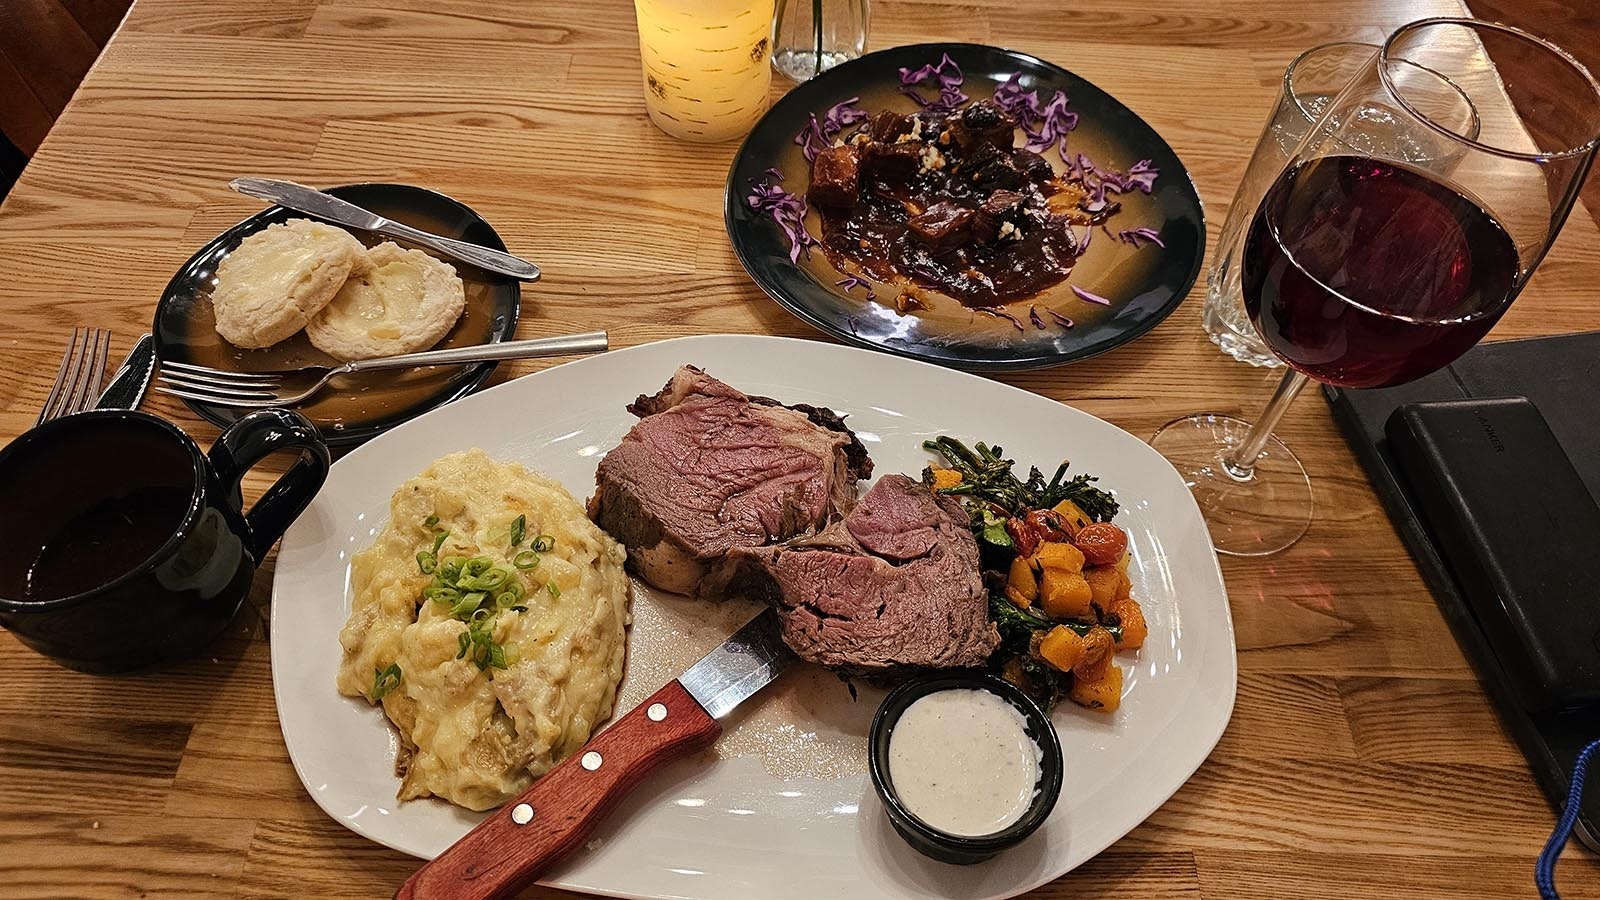 A prime rib dinner at Stockman's Saloon and Steakhouse, with a glass of red wine.